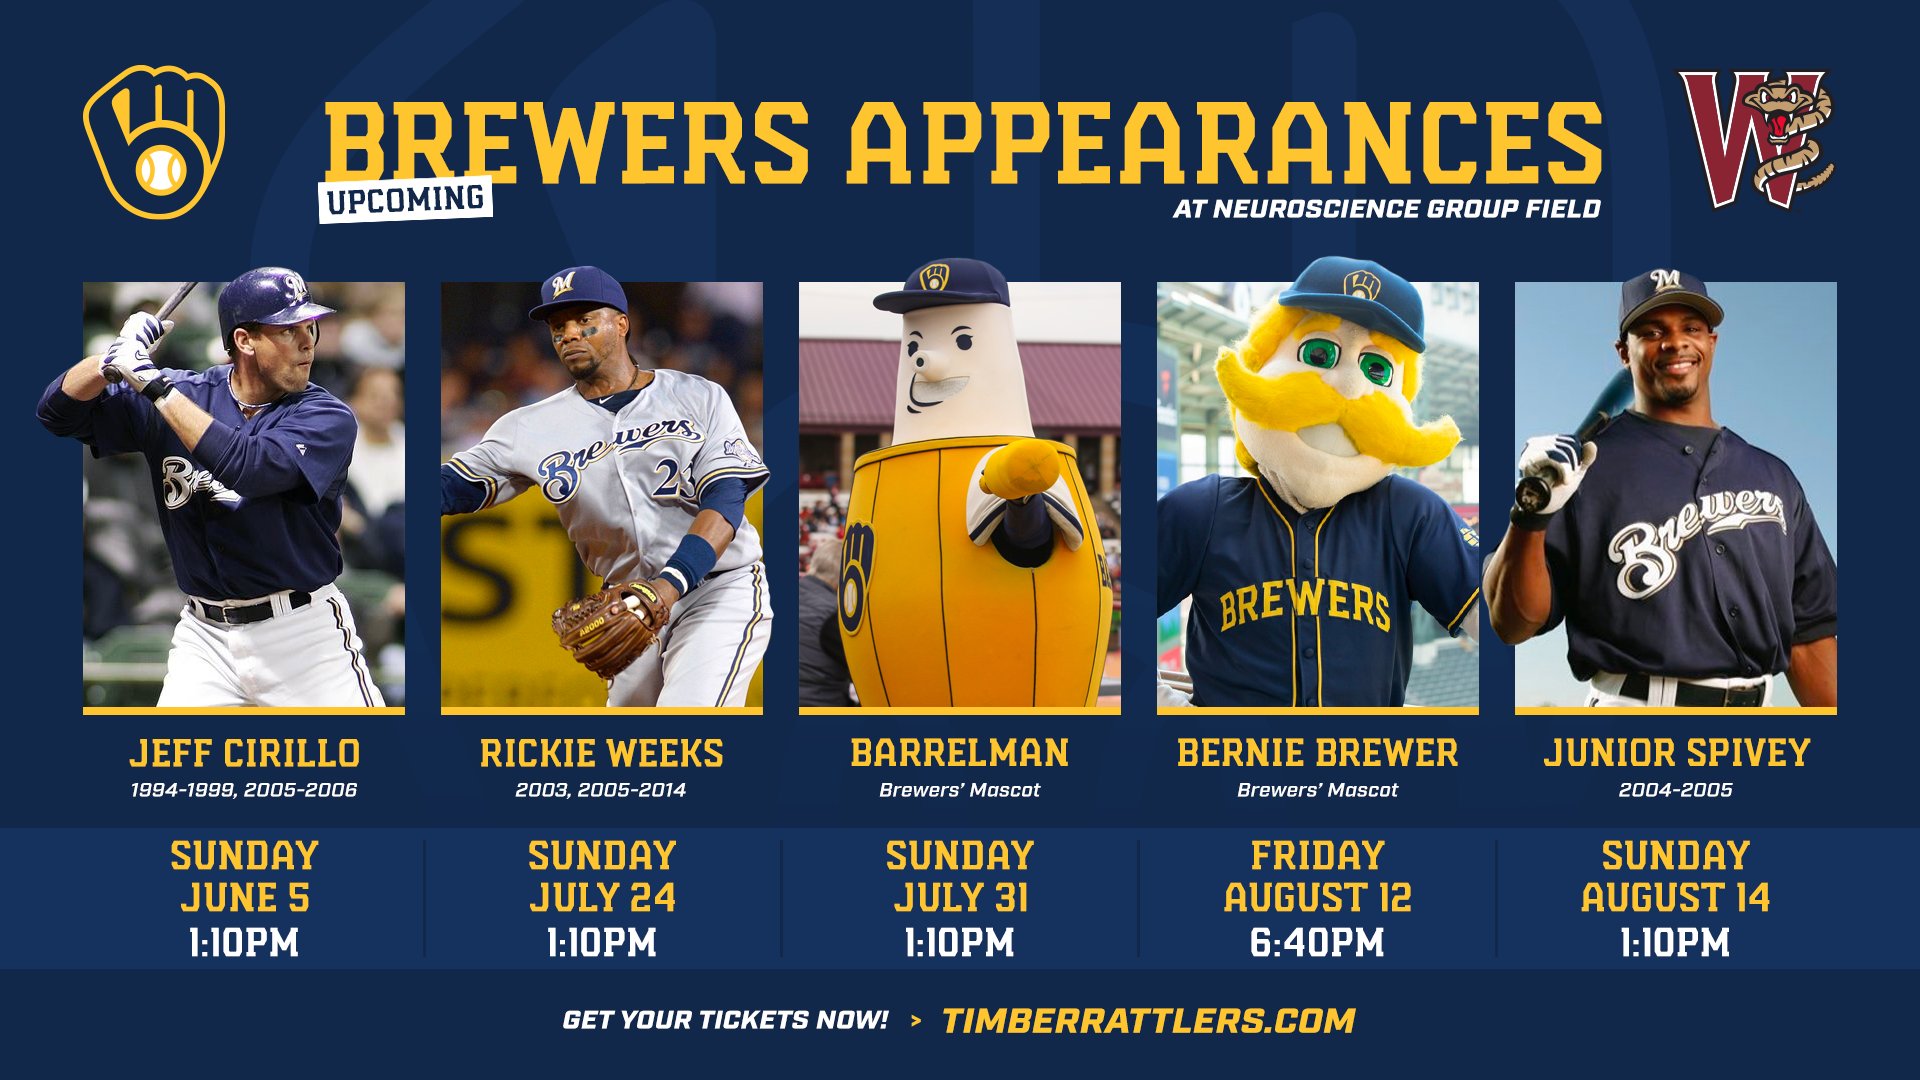 Wisconsin Timber Rattlers on X: Even more @Brewers appearances are headed  your way this season! June 5 ⏩ @theicon26 July 24 ⏩ Rickie Weeks July 31 ⏩  Barrelman August 12 ⏩ @Bernie_Brewer